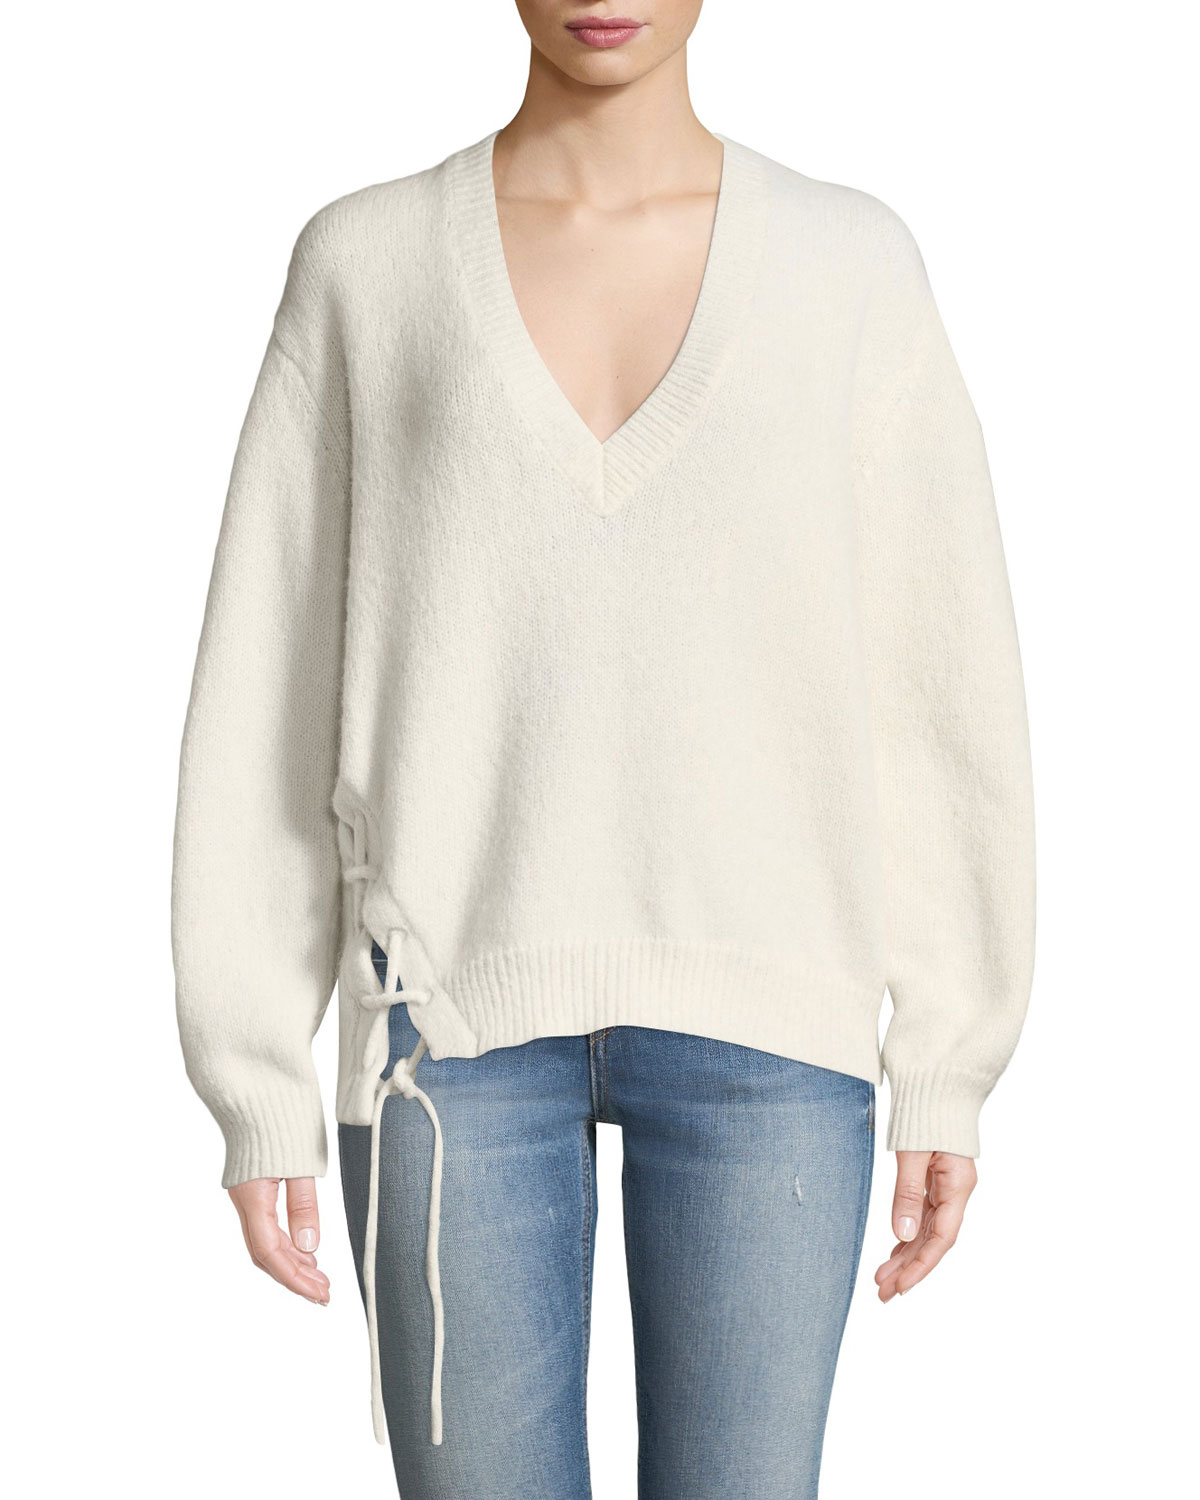 Mylo V-Neck Alpaca Sweater with Lace-Up Detail by IRO Alpaca Clothing to Keep You Warm this Winter